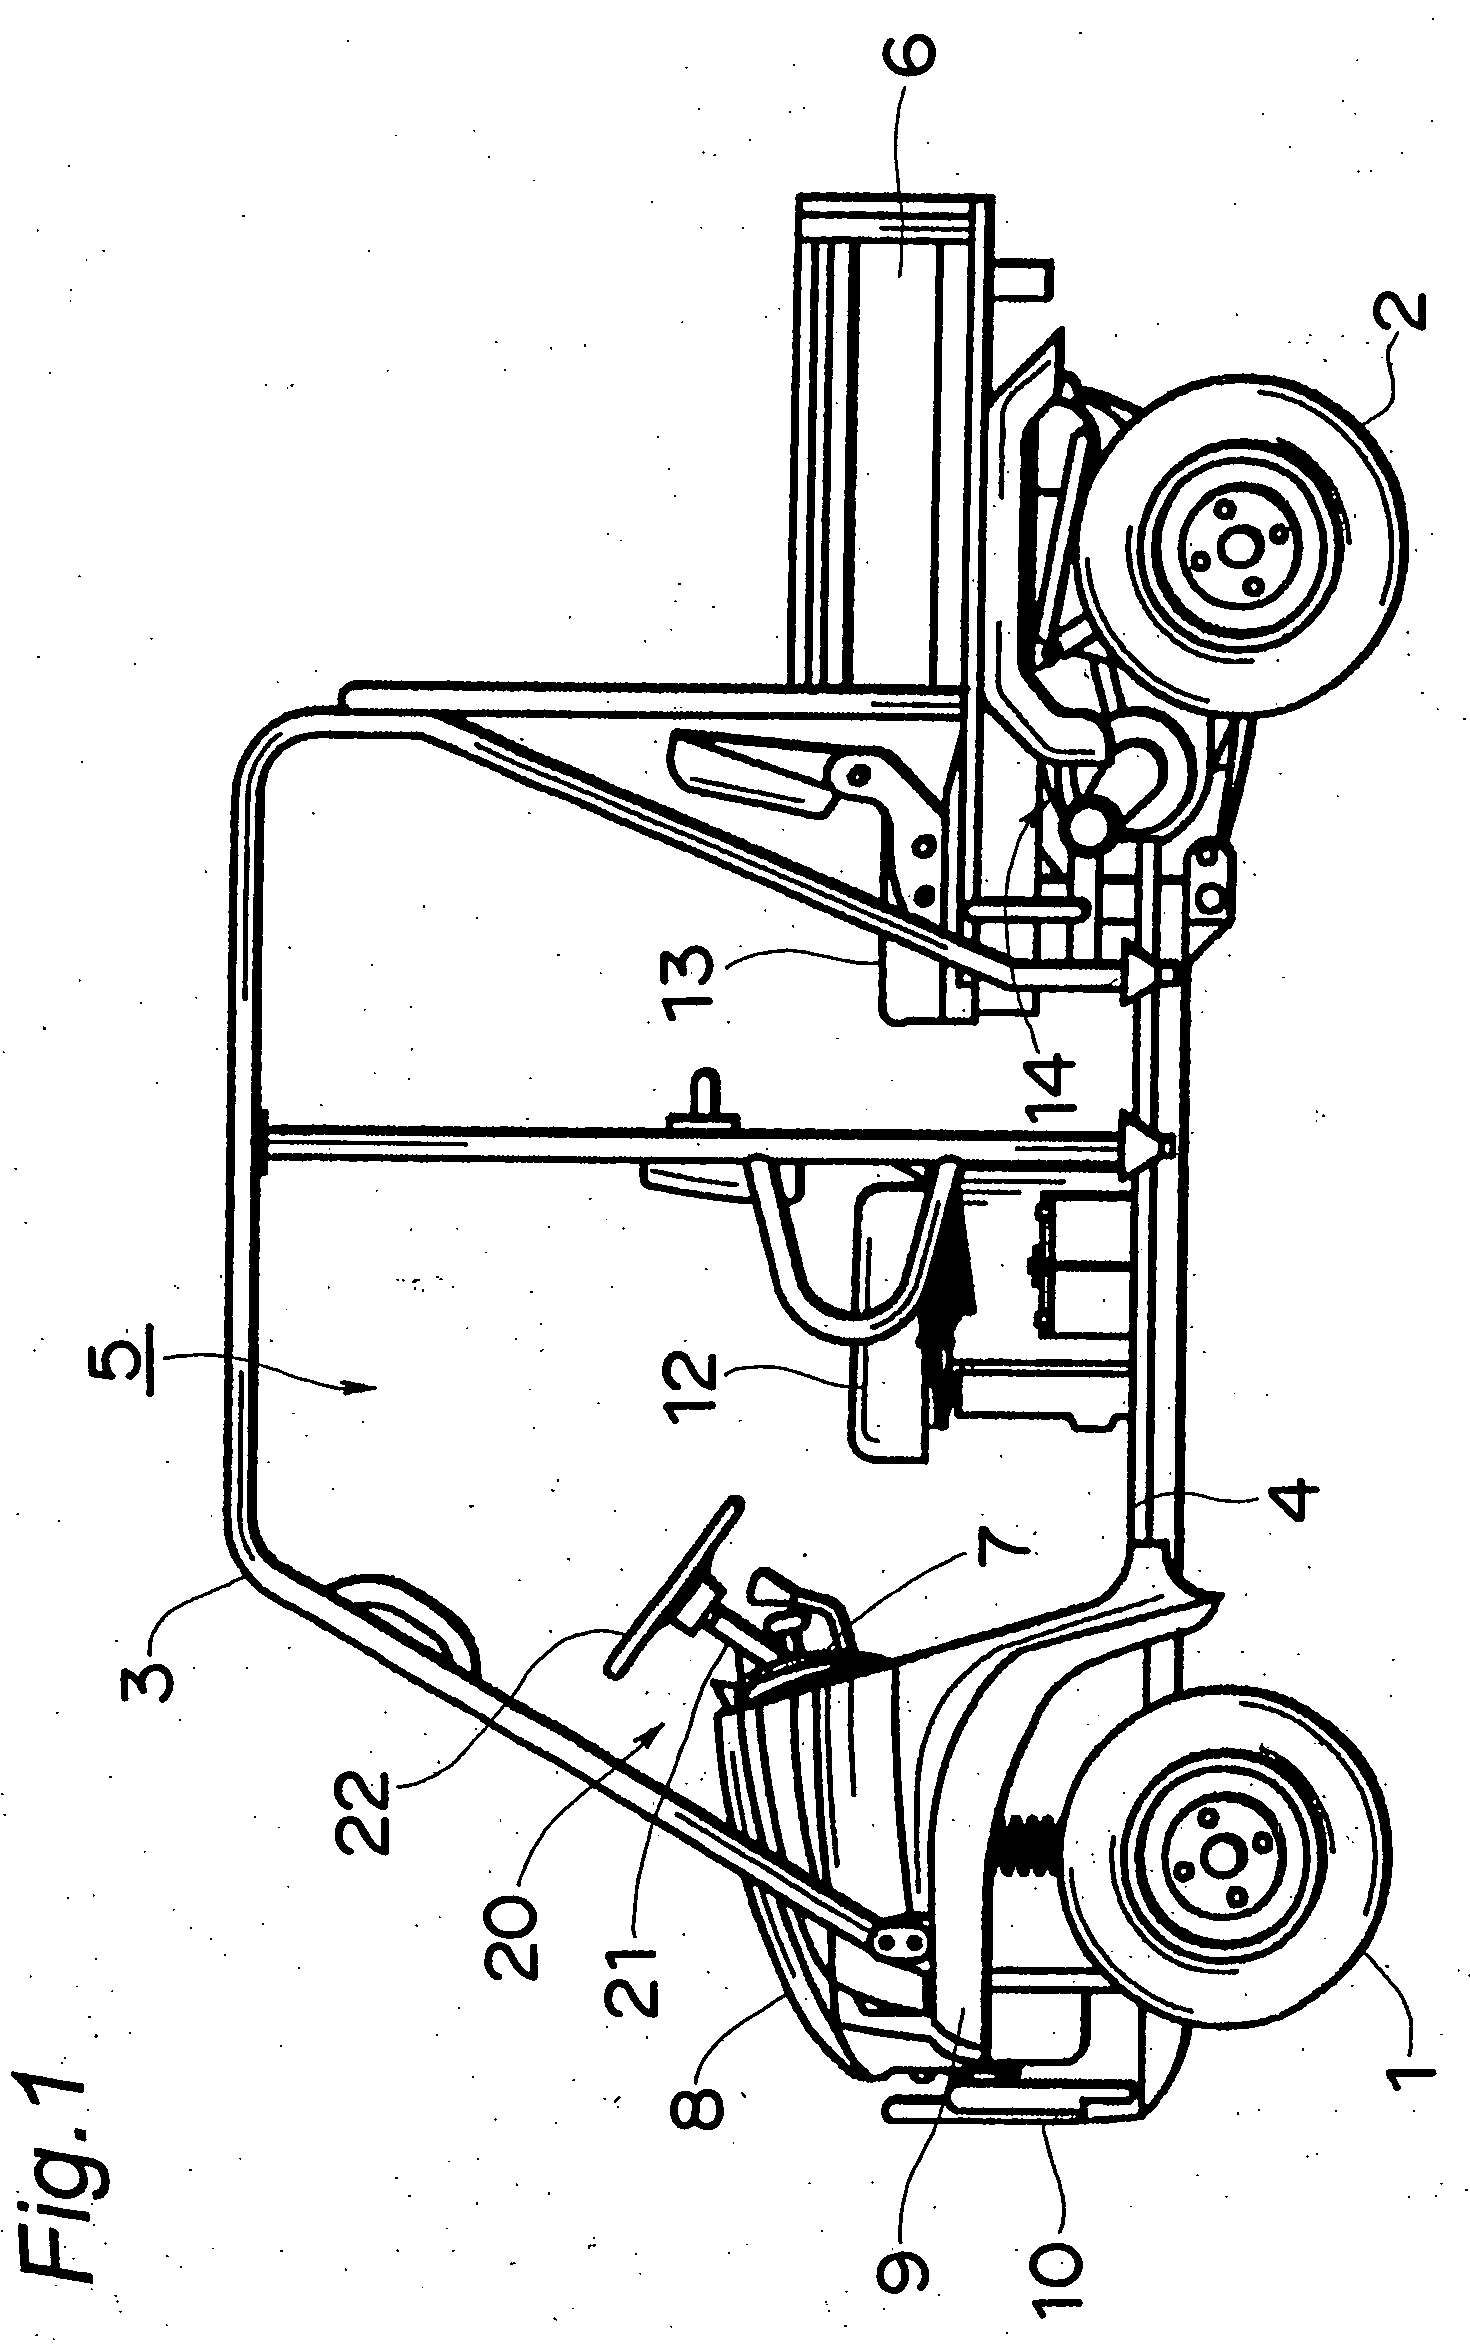 Electric power steering system for vehicle and utility vehicle therewith